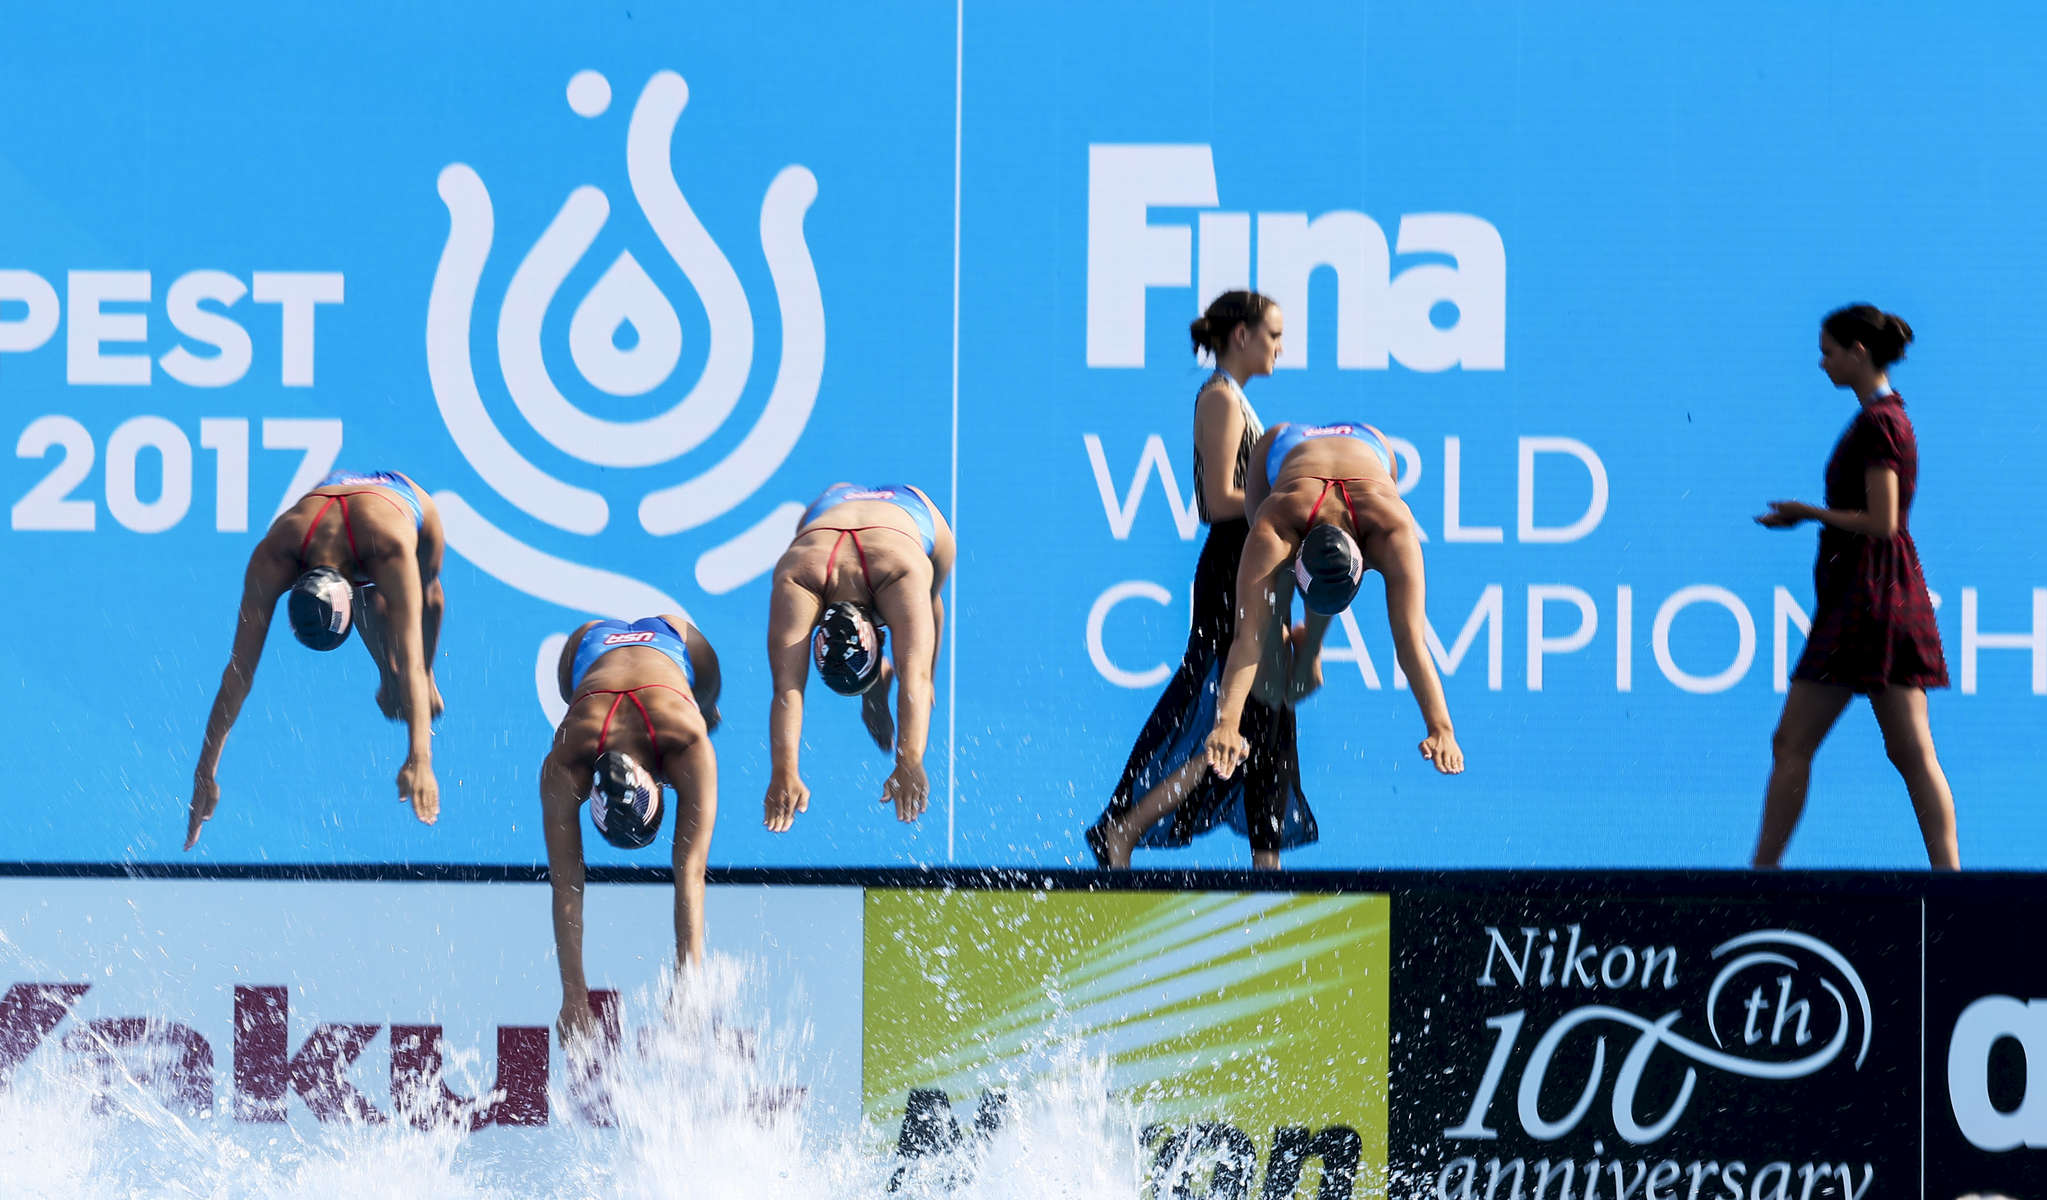 The American team practices before competing in the Synchronised Swimming Team Free finals, while the FINA team rehearses the medals ceremony, during the FINA World championships in Budapest, Hungary on July 21, 2017.